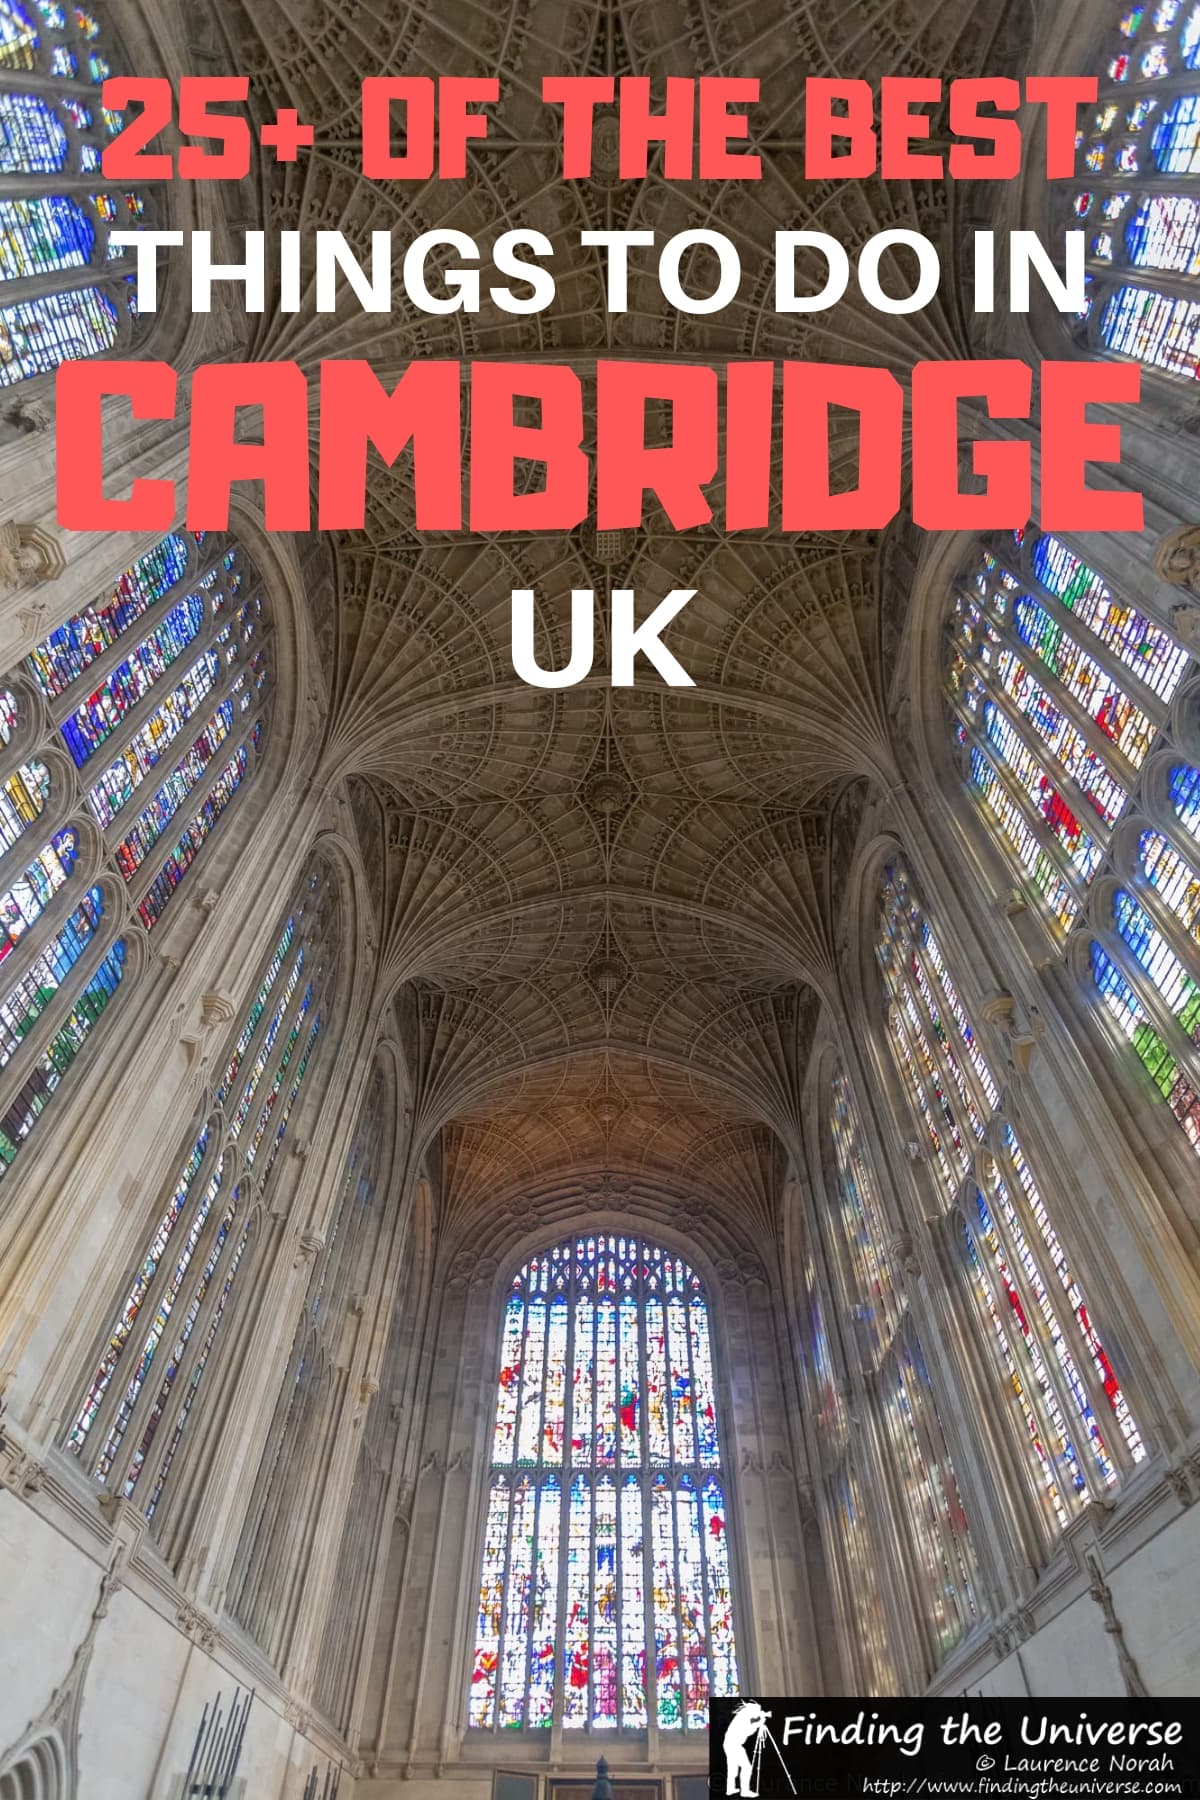 A detailed guide to things to do in Cambridge, including visiting Cambridge Colleges, punting, museums and more! Also has tips on getting here, where to stay and more! #travel #uk #cambridge